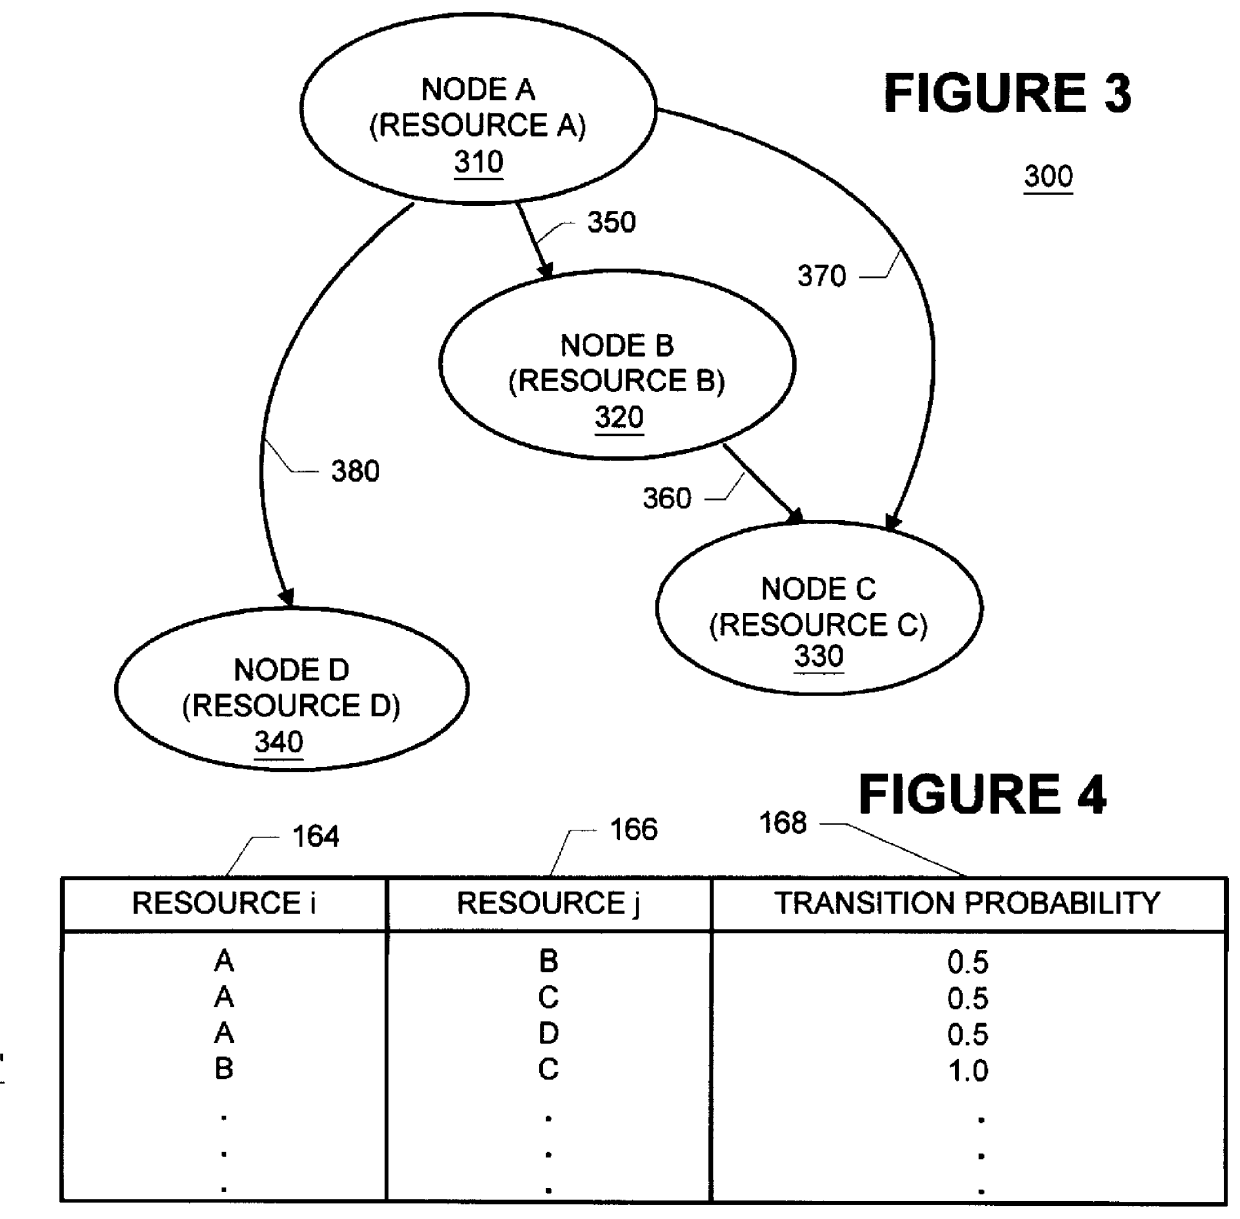 Methods and apparatus for building resource transition probability models for use in pre-fetching resources, editing resource link topology, building resource link topology templates, and collaborative filtering